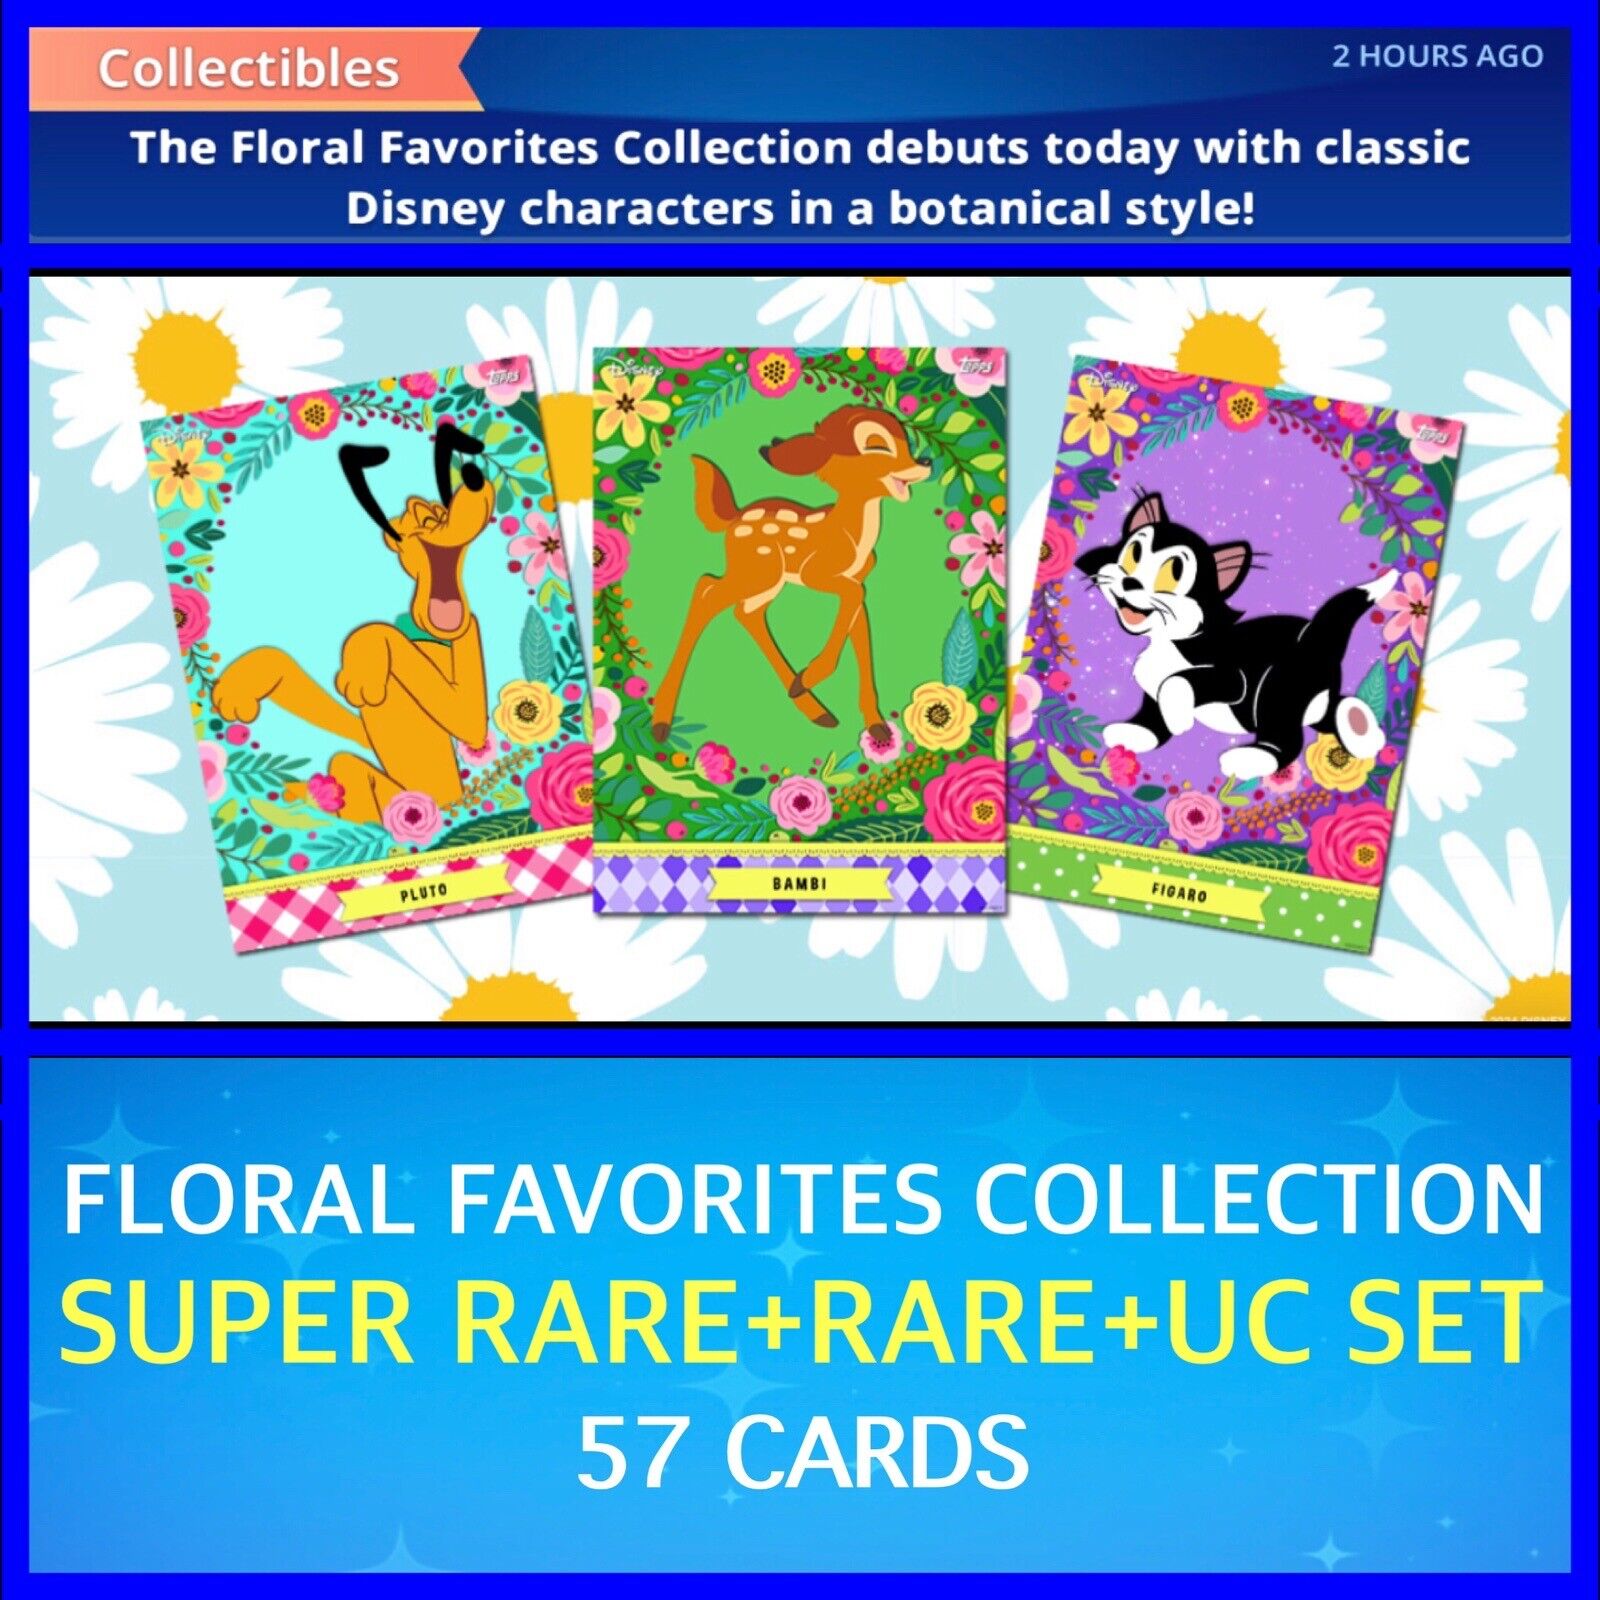 FLORAL FAVORITES COLLECTION-SUPER RARE+R+UC 57 CARD SET-TOPPS DISNEY COLLECT